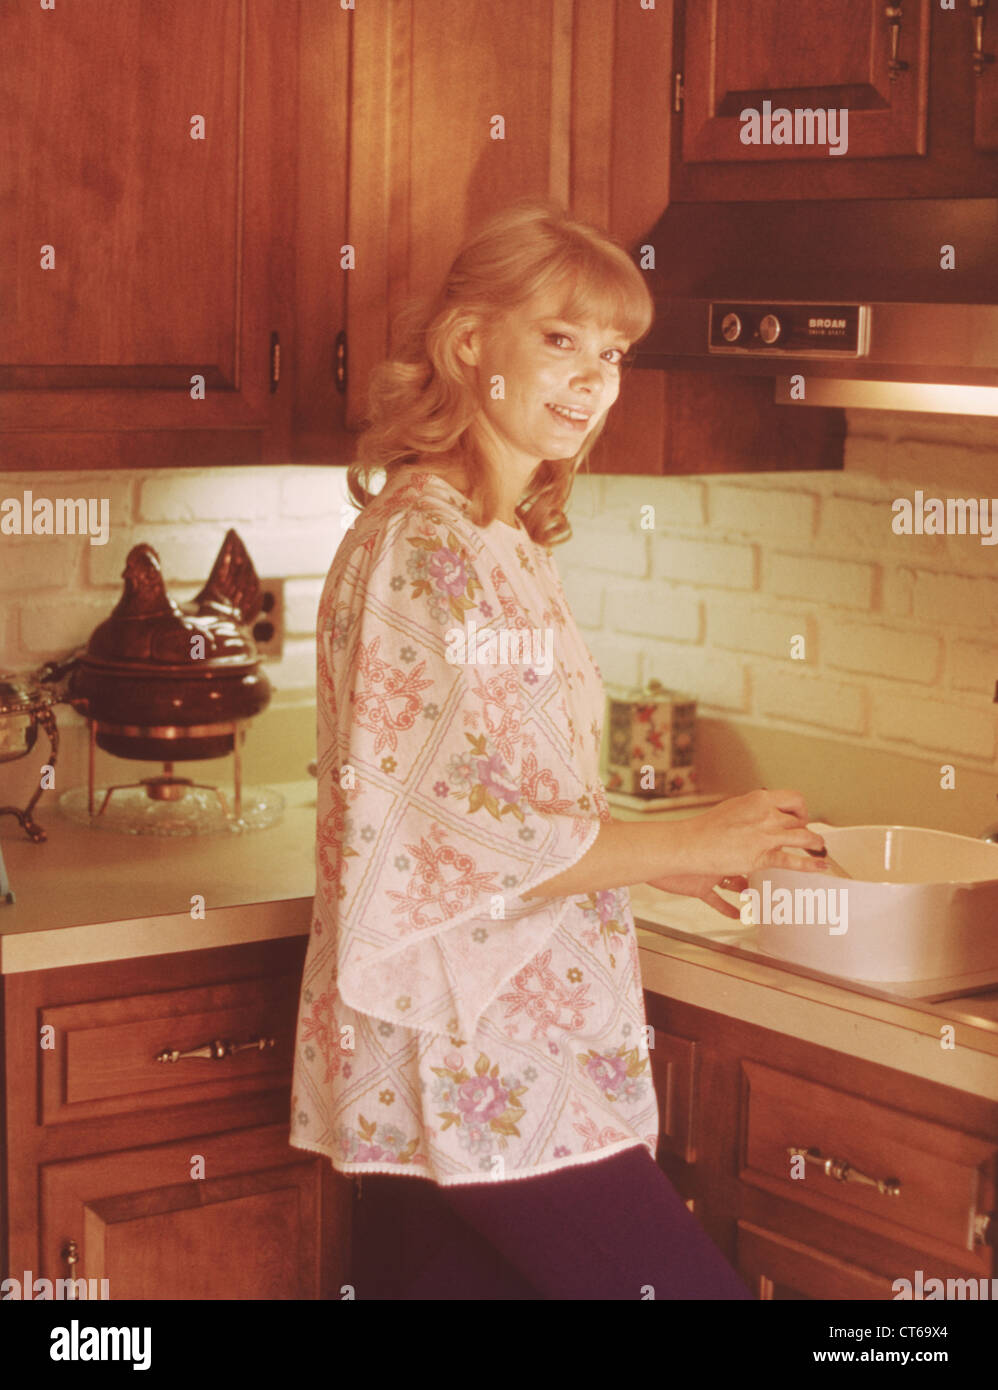 Woman preparing food in kitchen of 1970's home Stock Photo